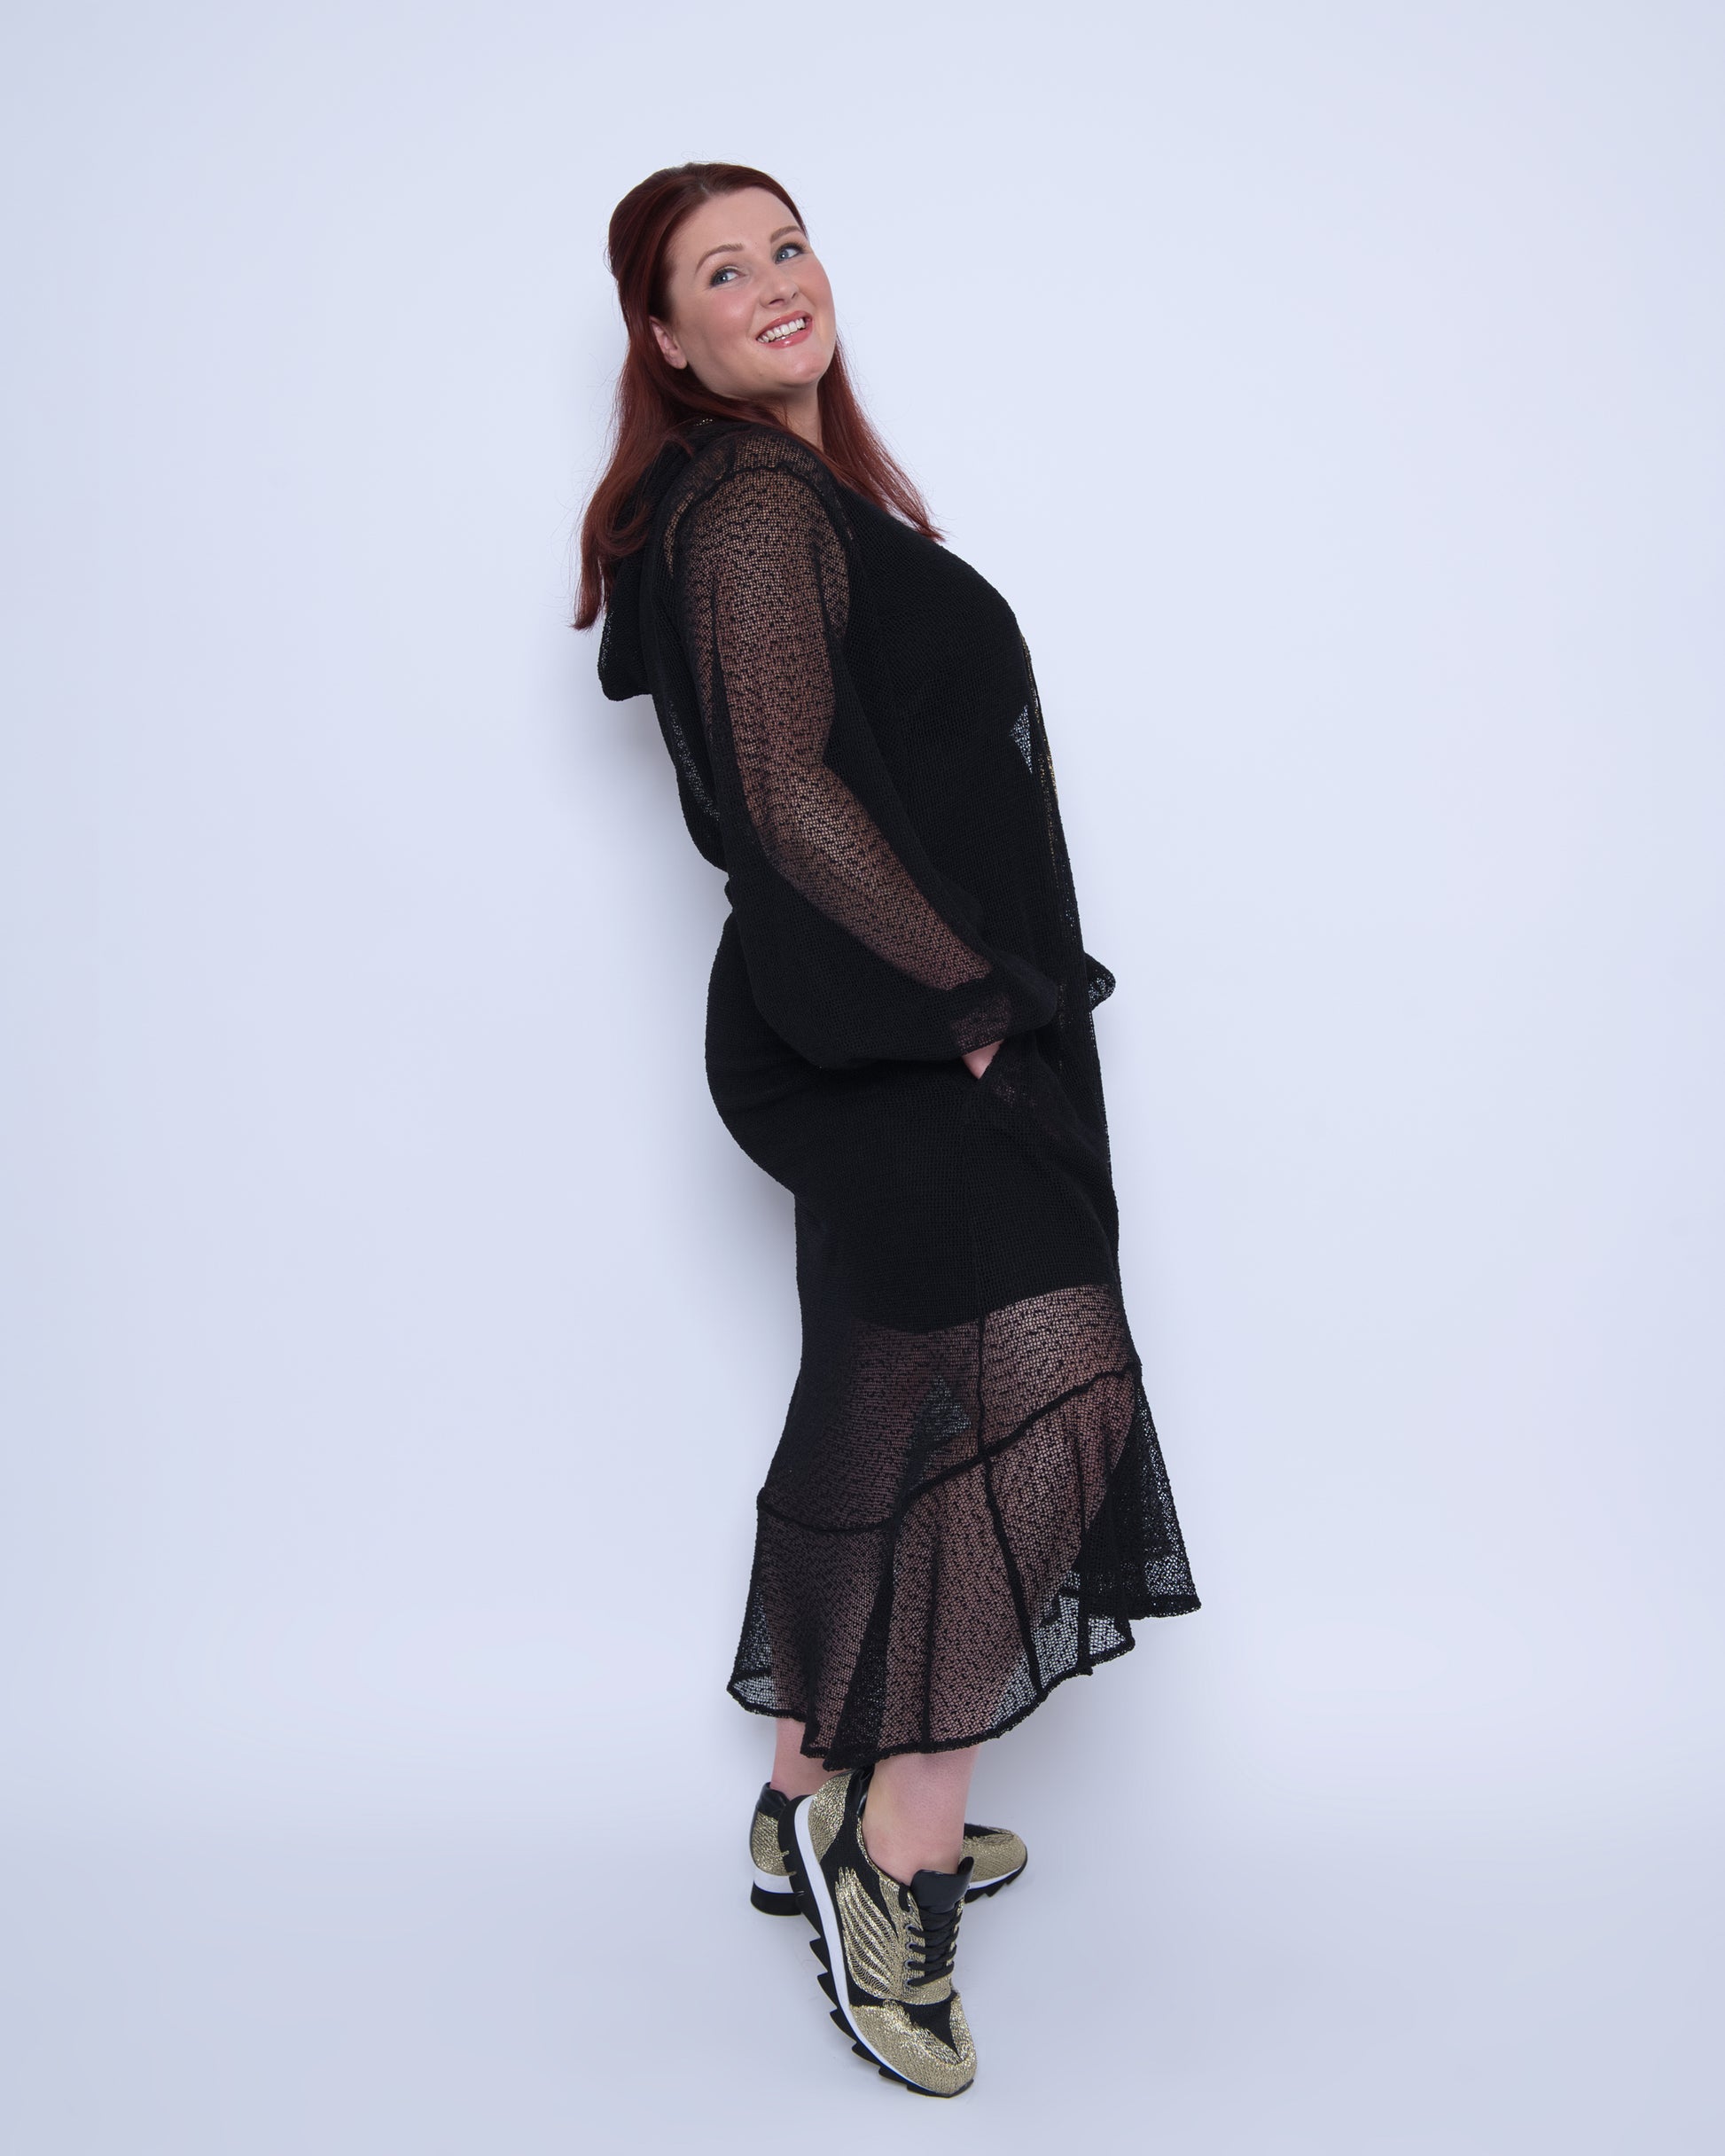 Plus Size Aphrodite Black Holiday Resort Dress with hoodie and black undergarment shown from the side, paired with gold and black sneakers.